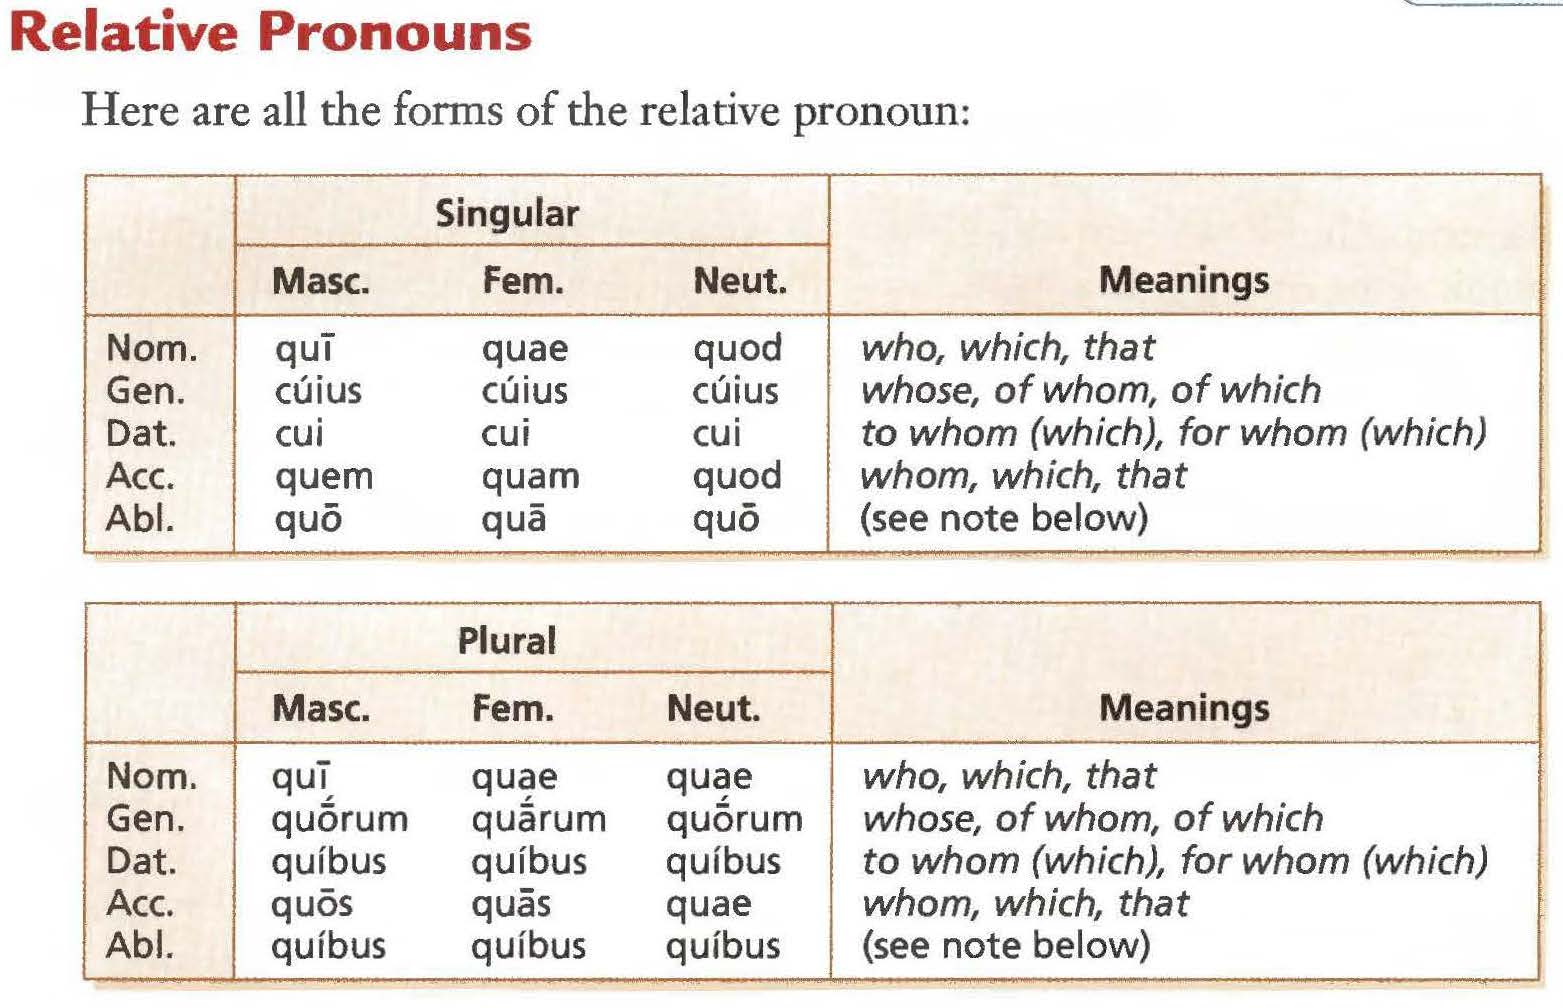 03-latin-2019-2020-28d-relative-pronouns-and-clauses-textbook